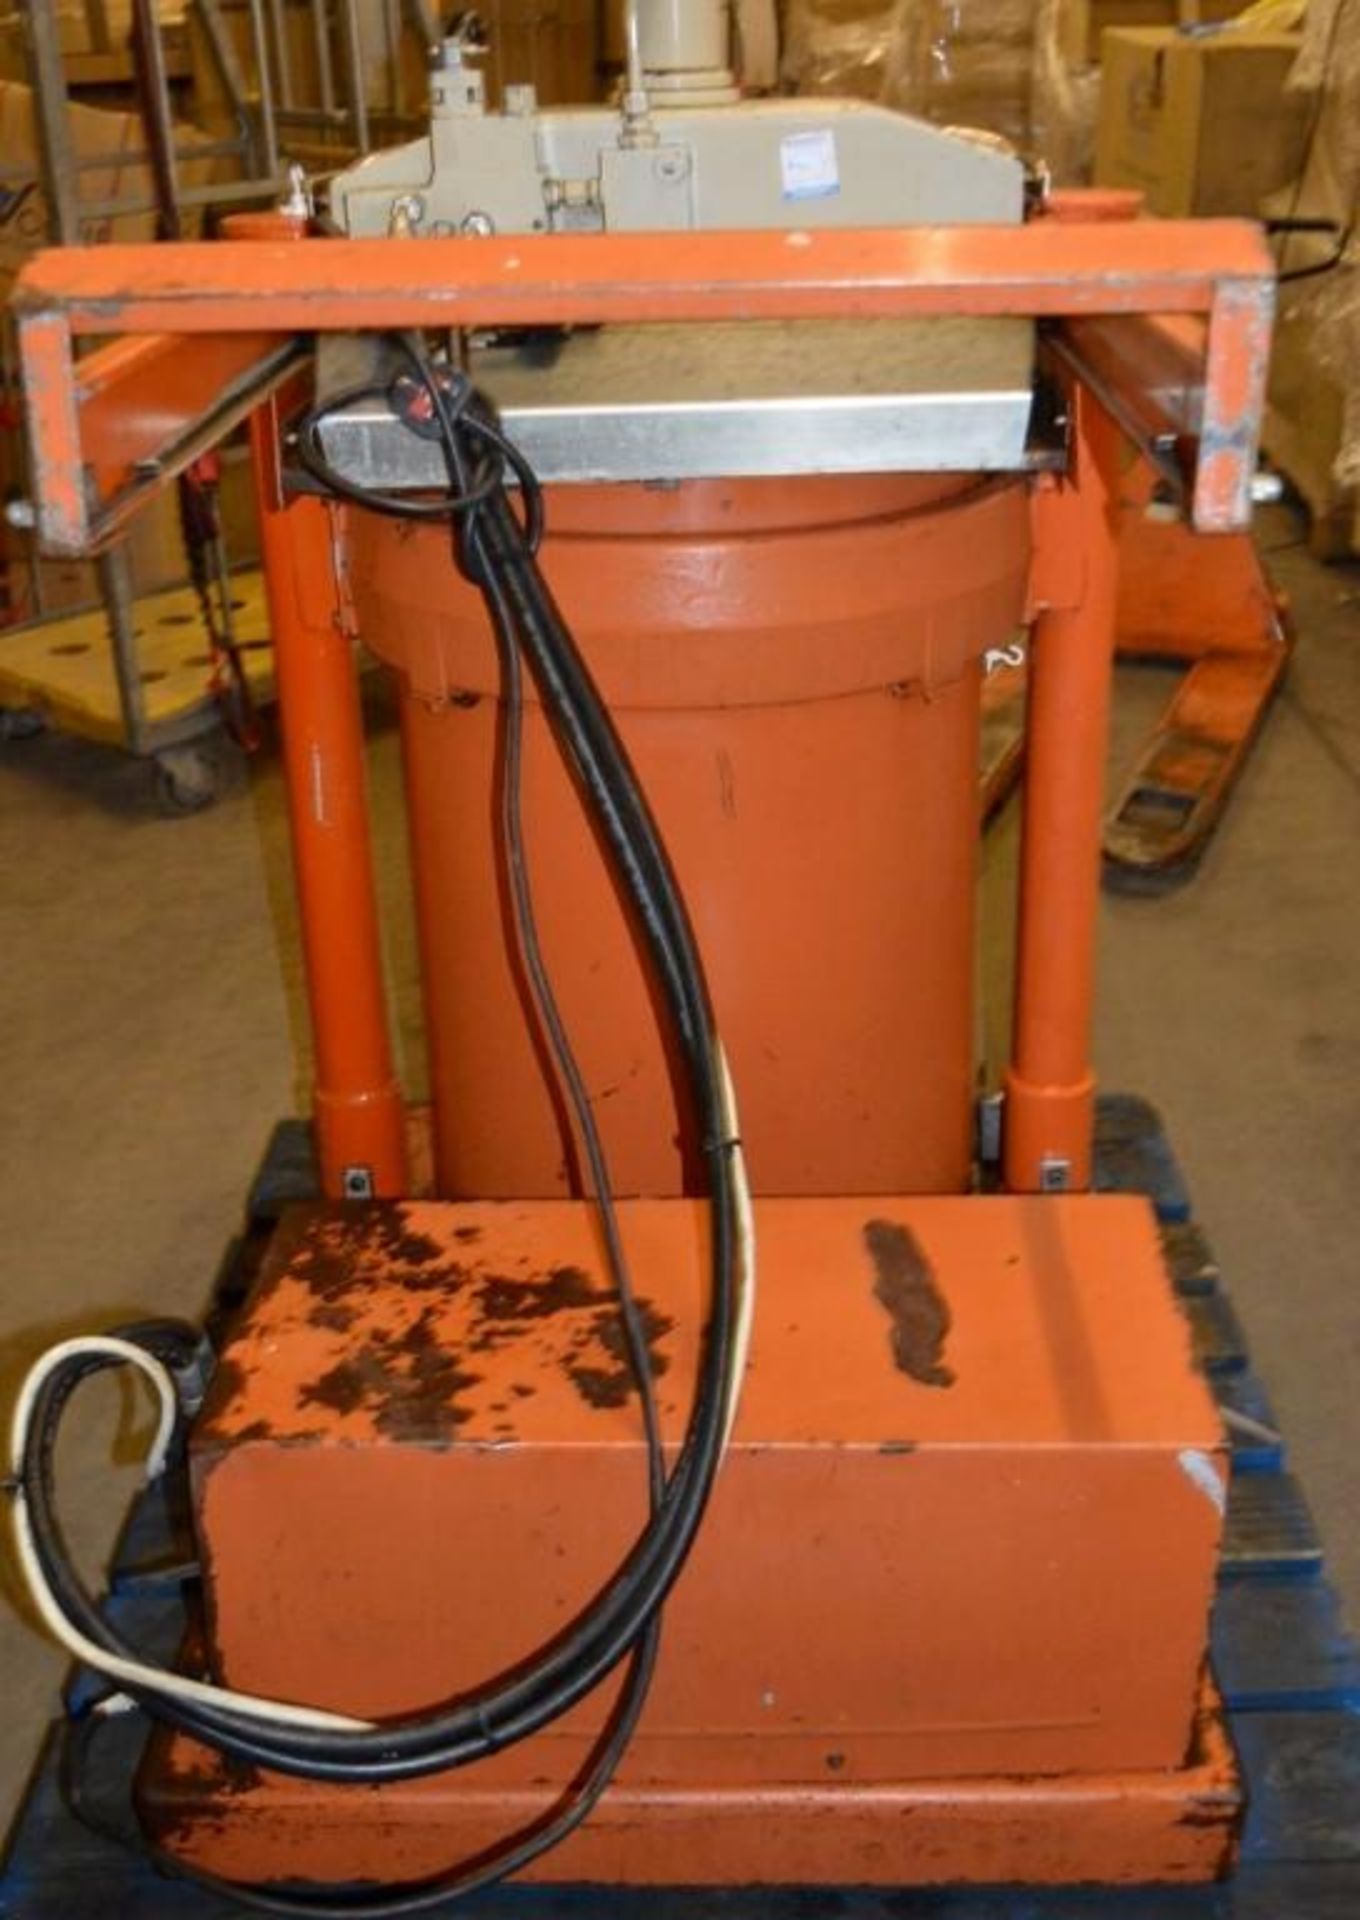 1 x Orwak 5030 Waste Compactor Bailer - Used For Compacting Recyclable or Non-Recyclable Waste - Image 4 of 4